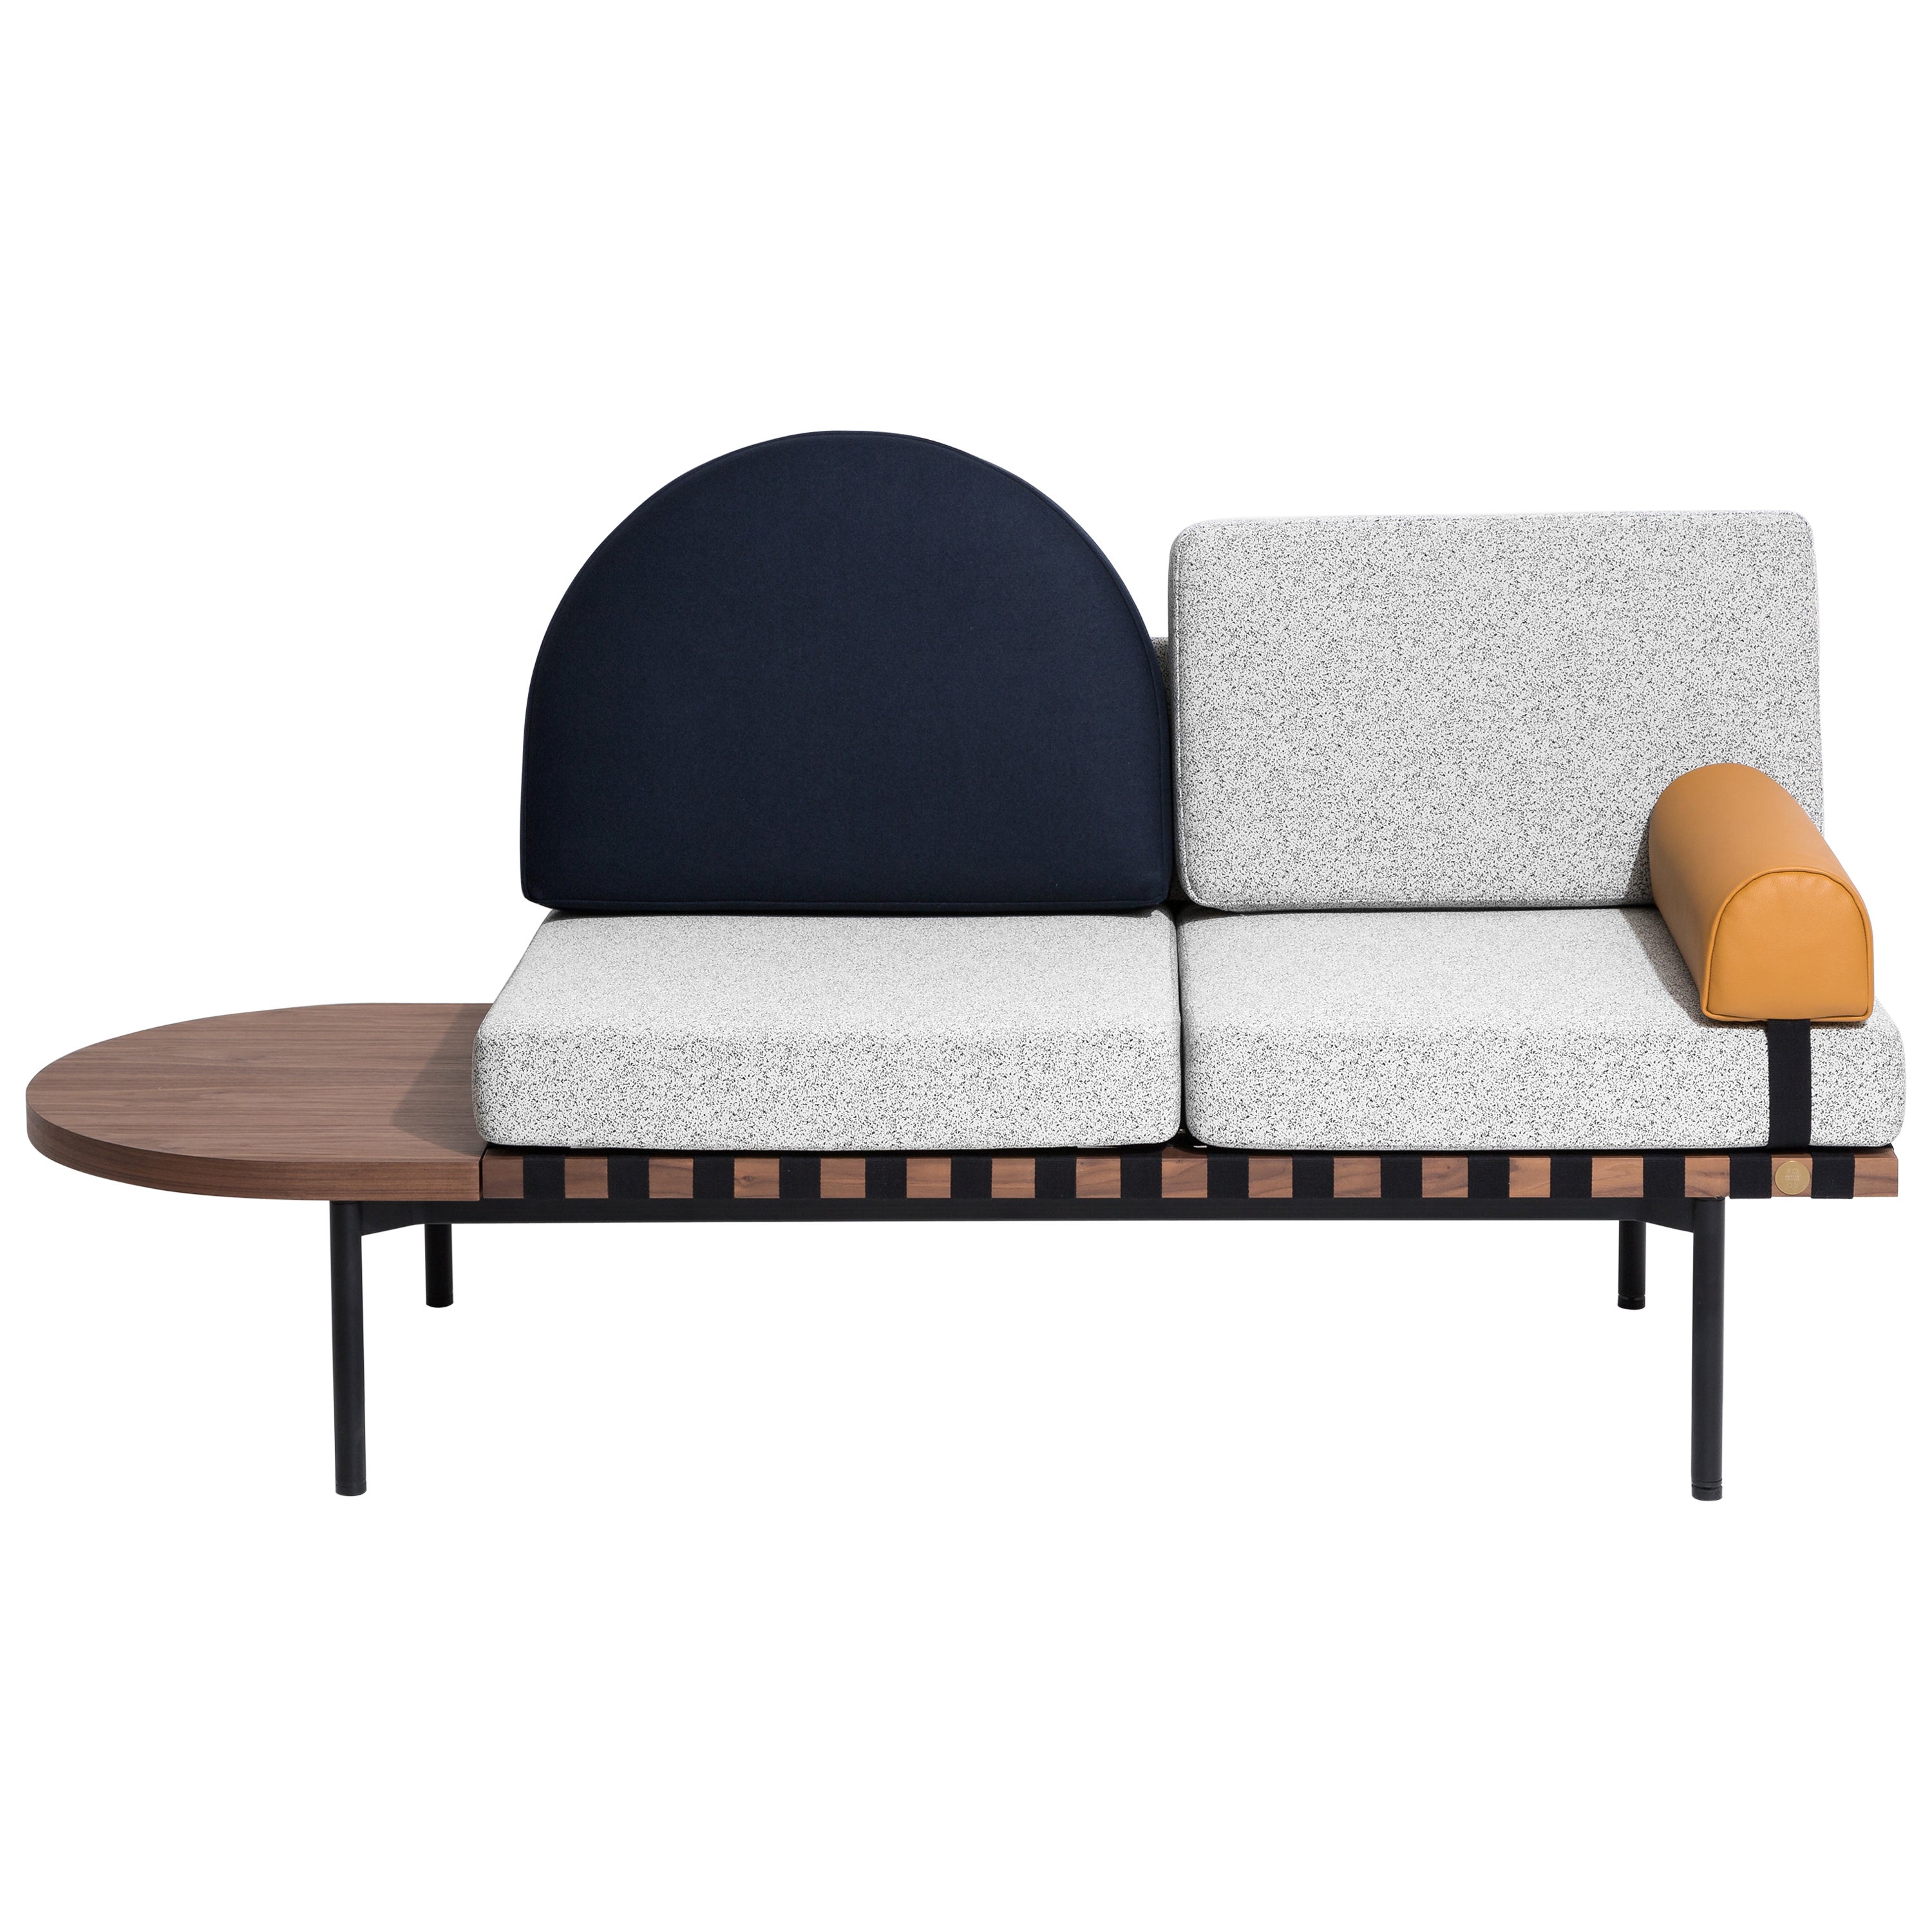 Petite Friture Grid Daybed in Blue-White Upholstery by Studio Pool, 2015